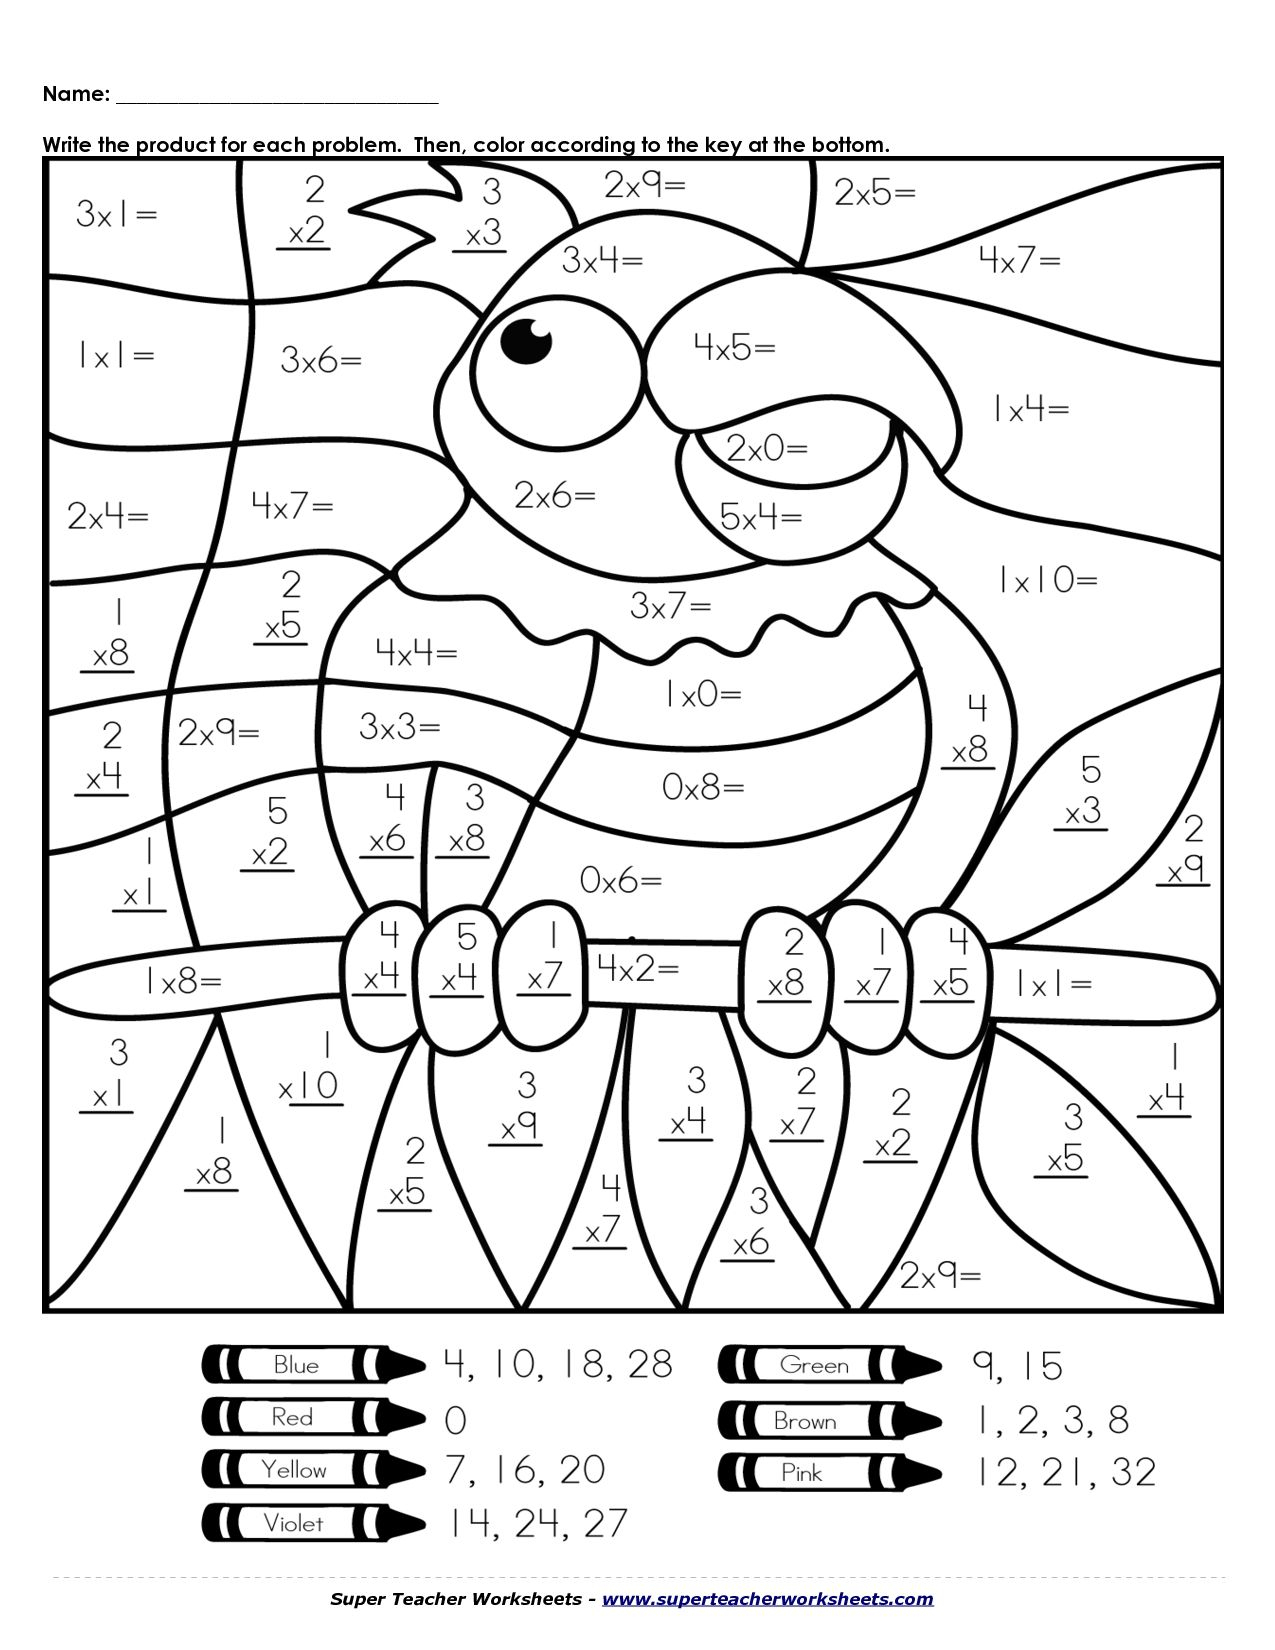 Multiplication Coloring Page | Math Coloring Worksheets, 2Nd throughout Multiplication Worksheets X2 X3